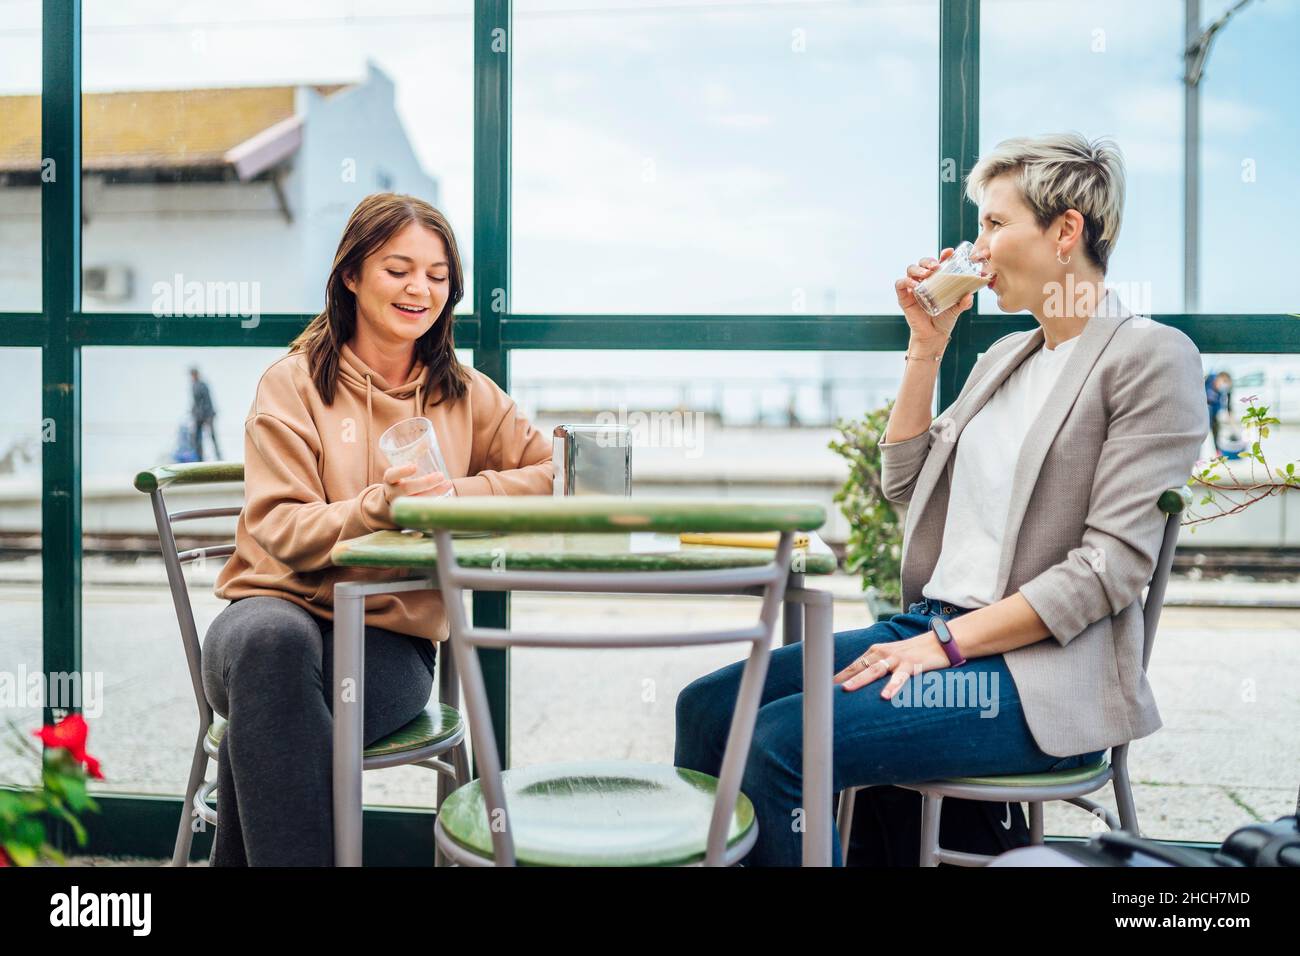 Two travelling women with luggage drinking coffee at train station, Portugal Stock Photo